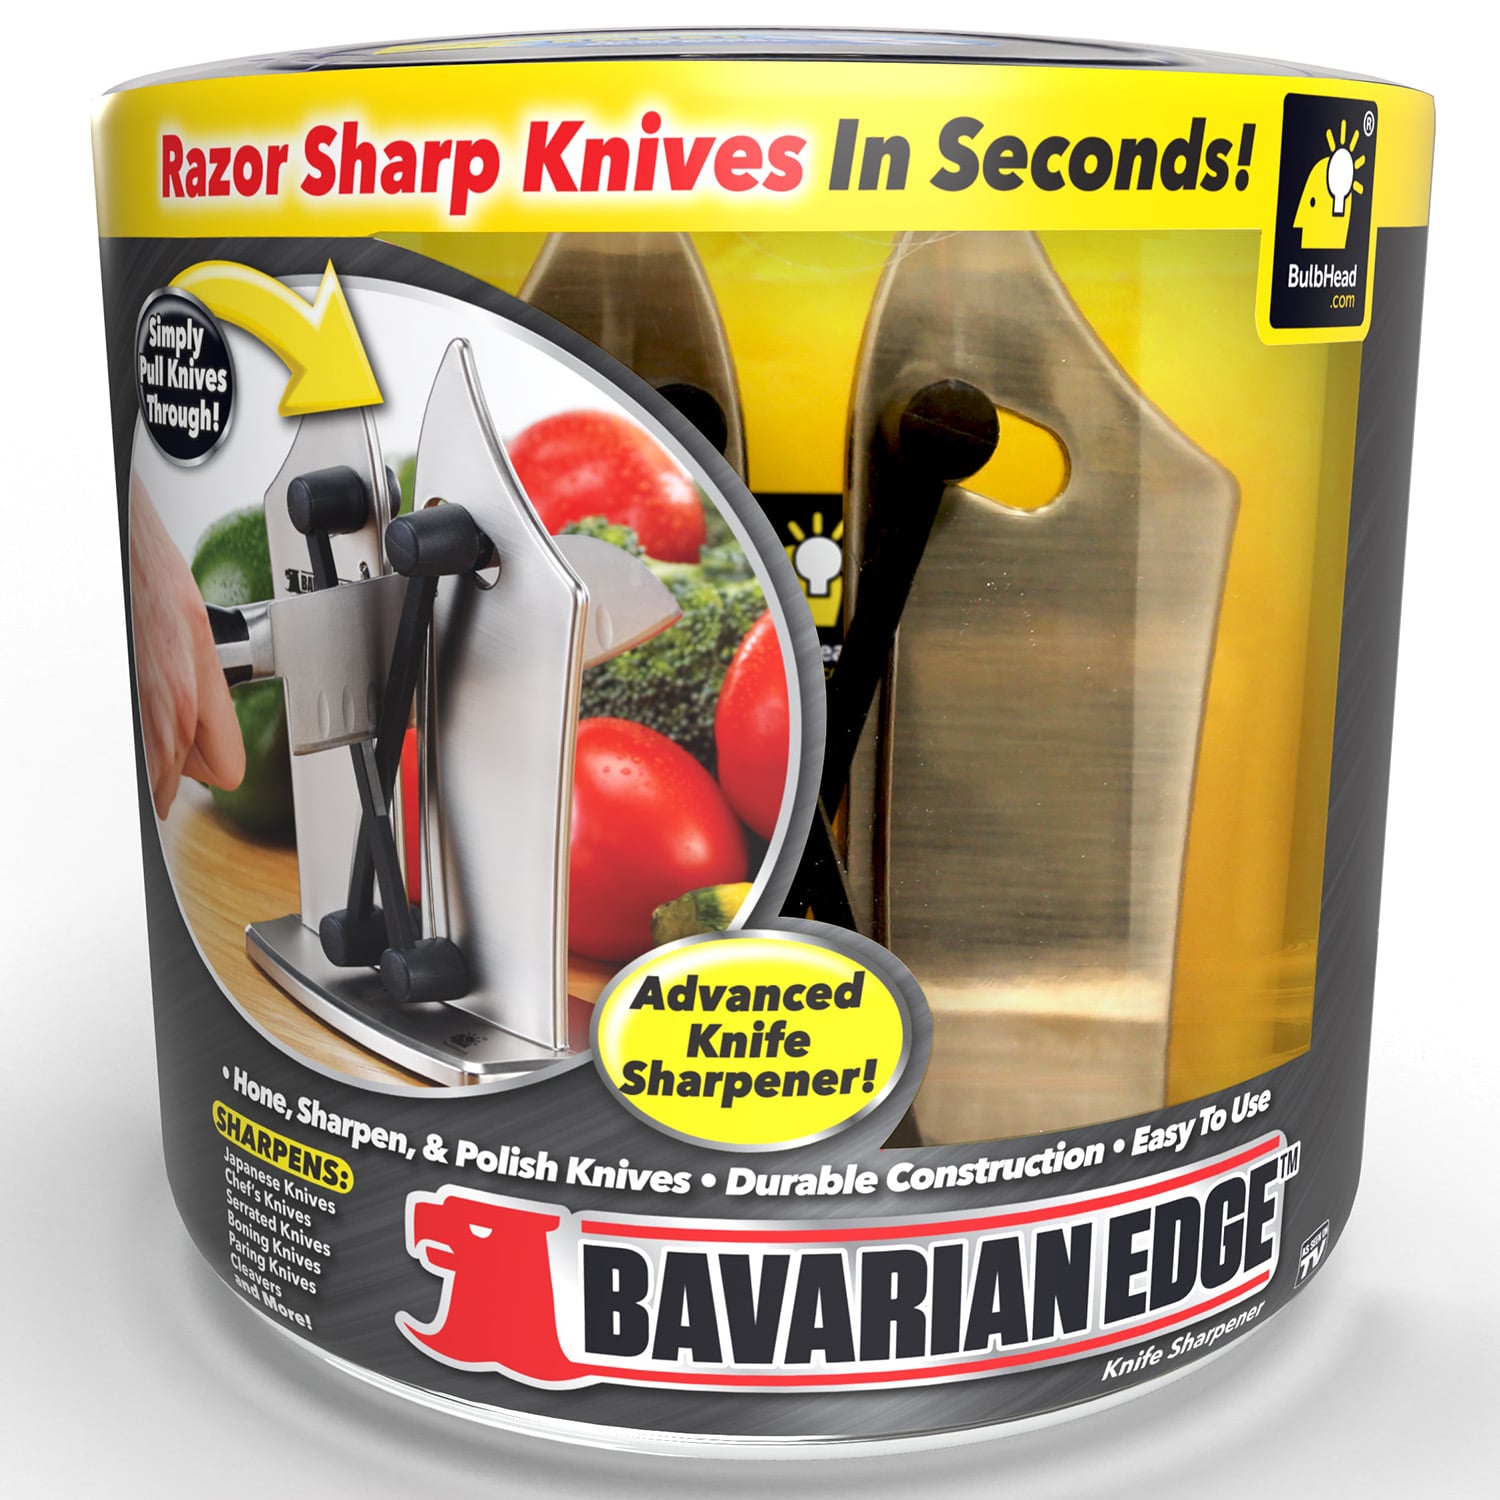 Official As Seen On TV Bavarian Edge Kitchen Knife Sharpener by BulbHead - image 2 of 9